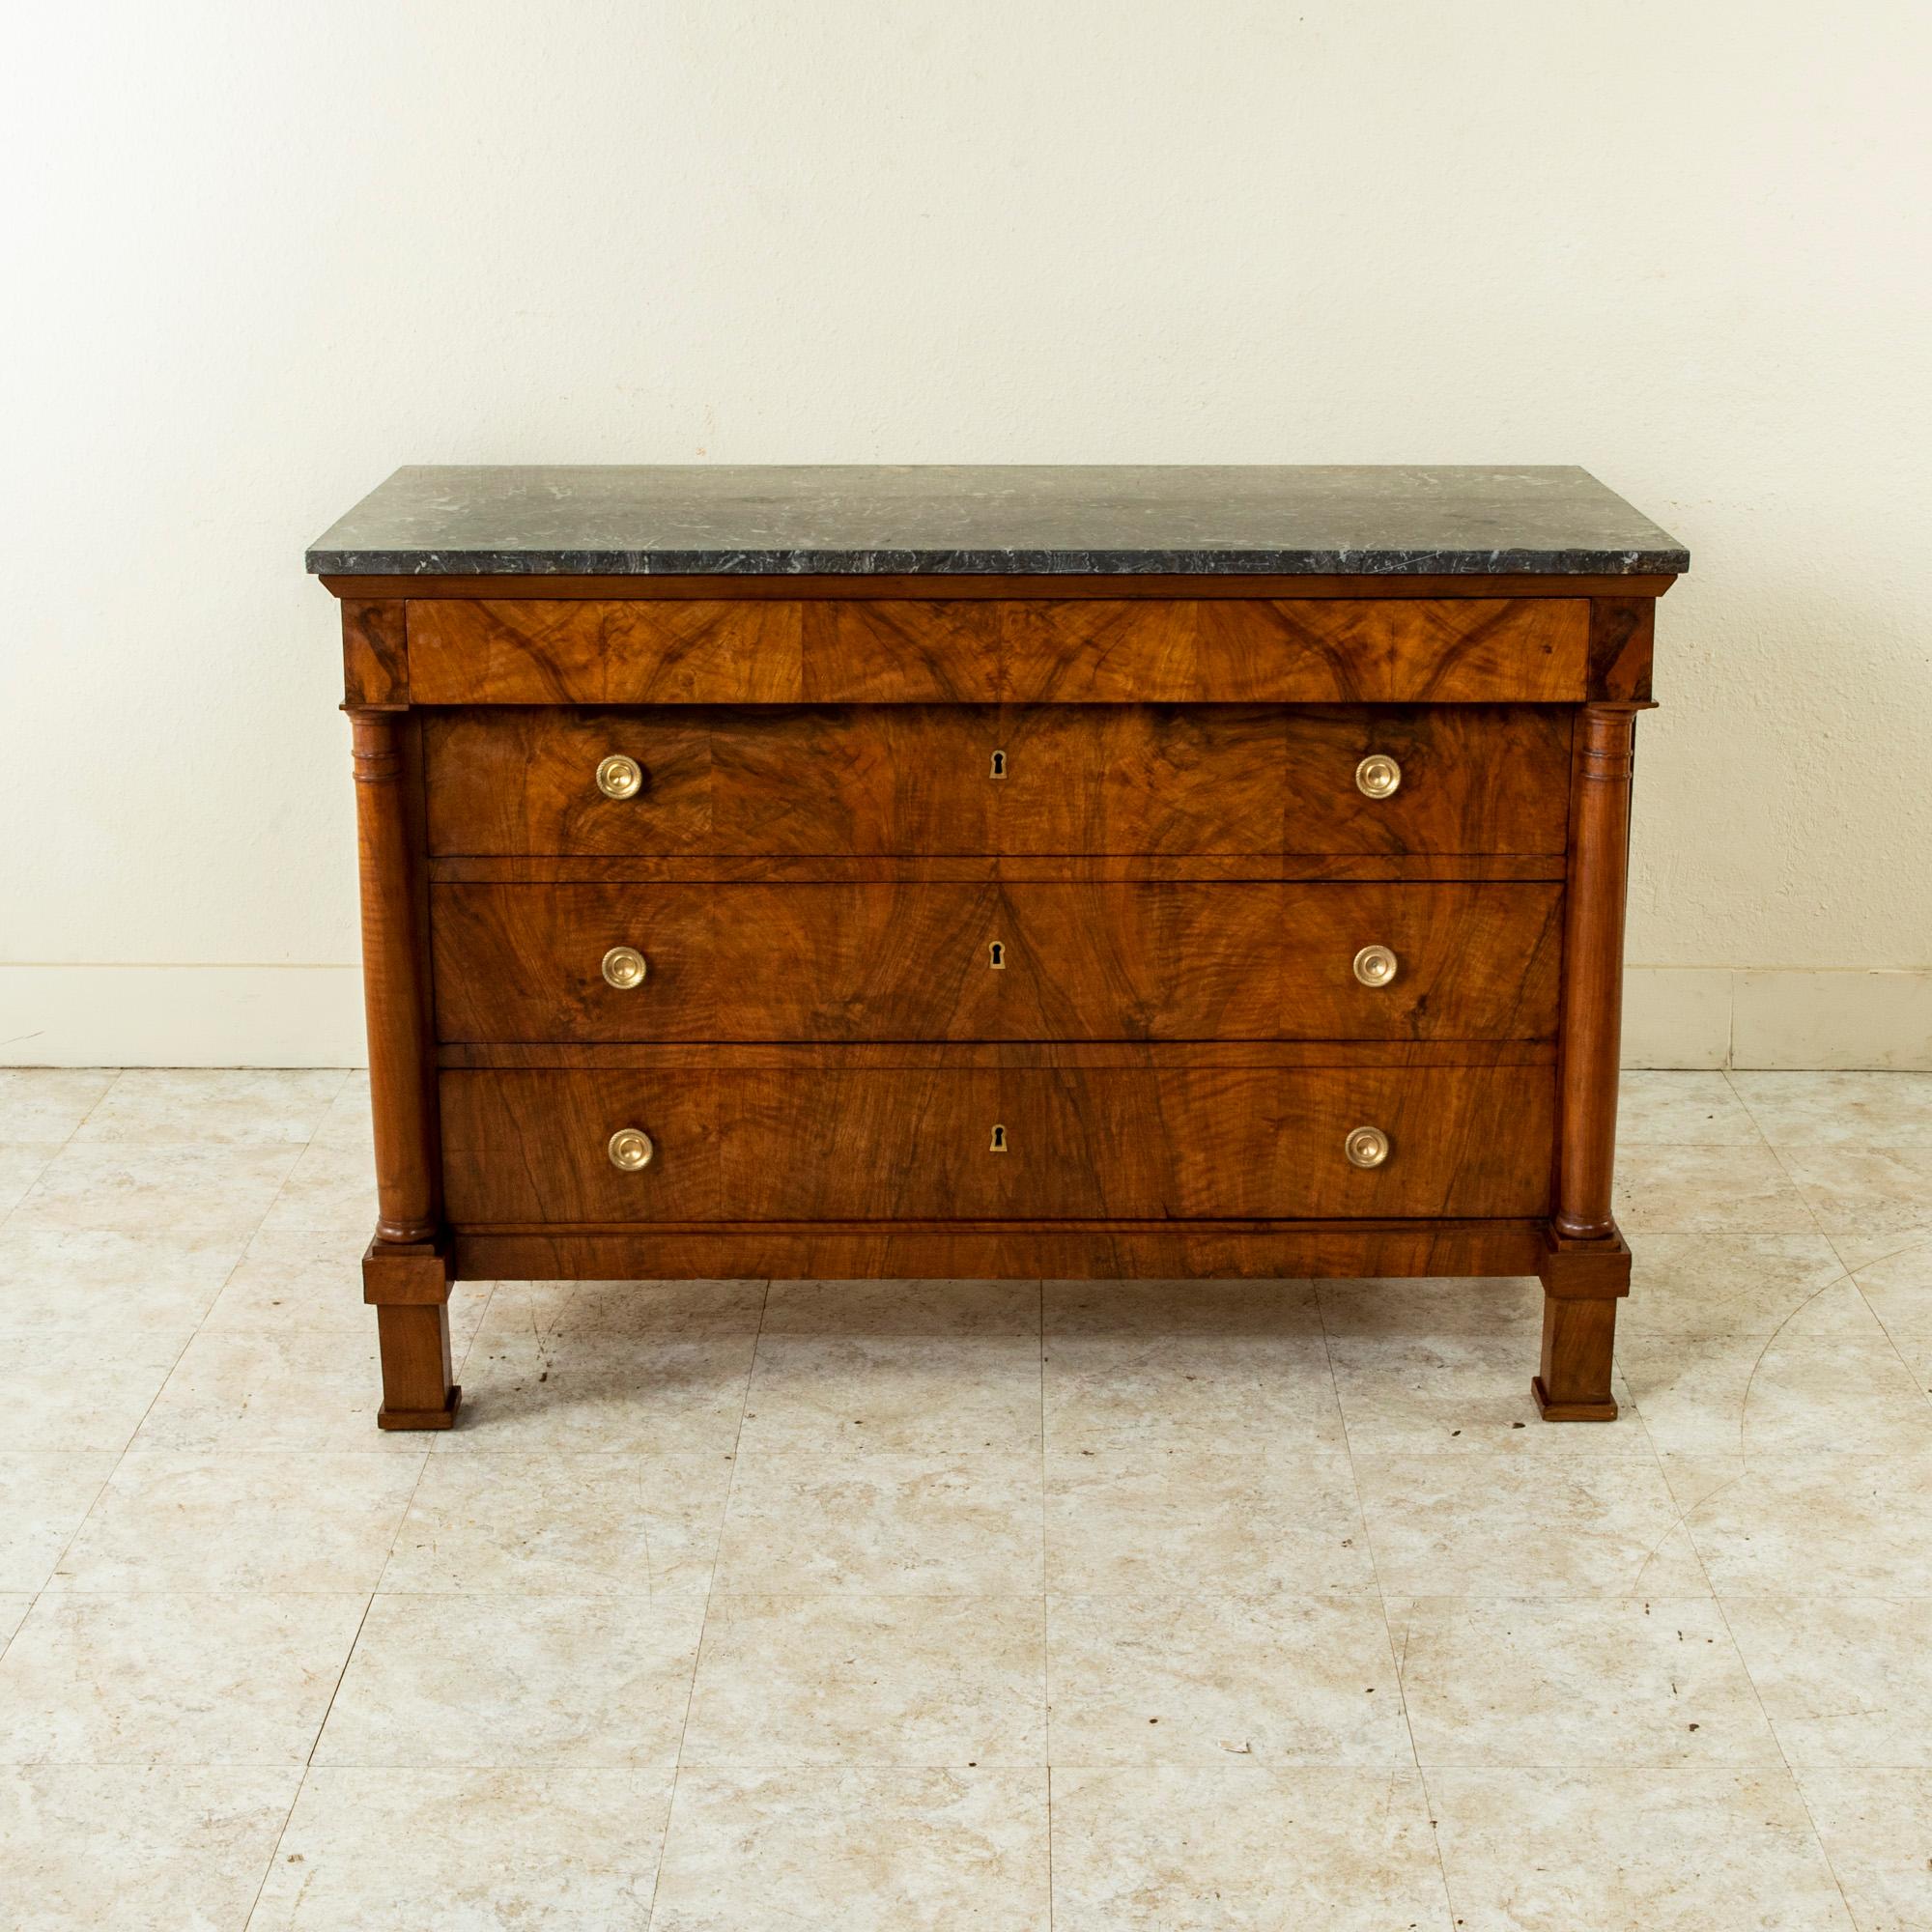 This early nineteenth century French Empire period book matched burl walnut commode or chest of drawers features a solid Saint Anne marble top and two detached columns resting on square plinths. Three drawers of dovetail construction are fitted with